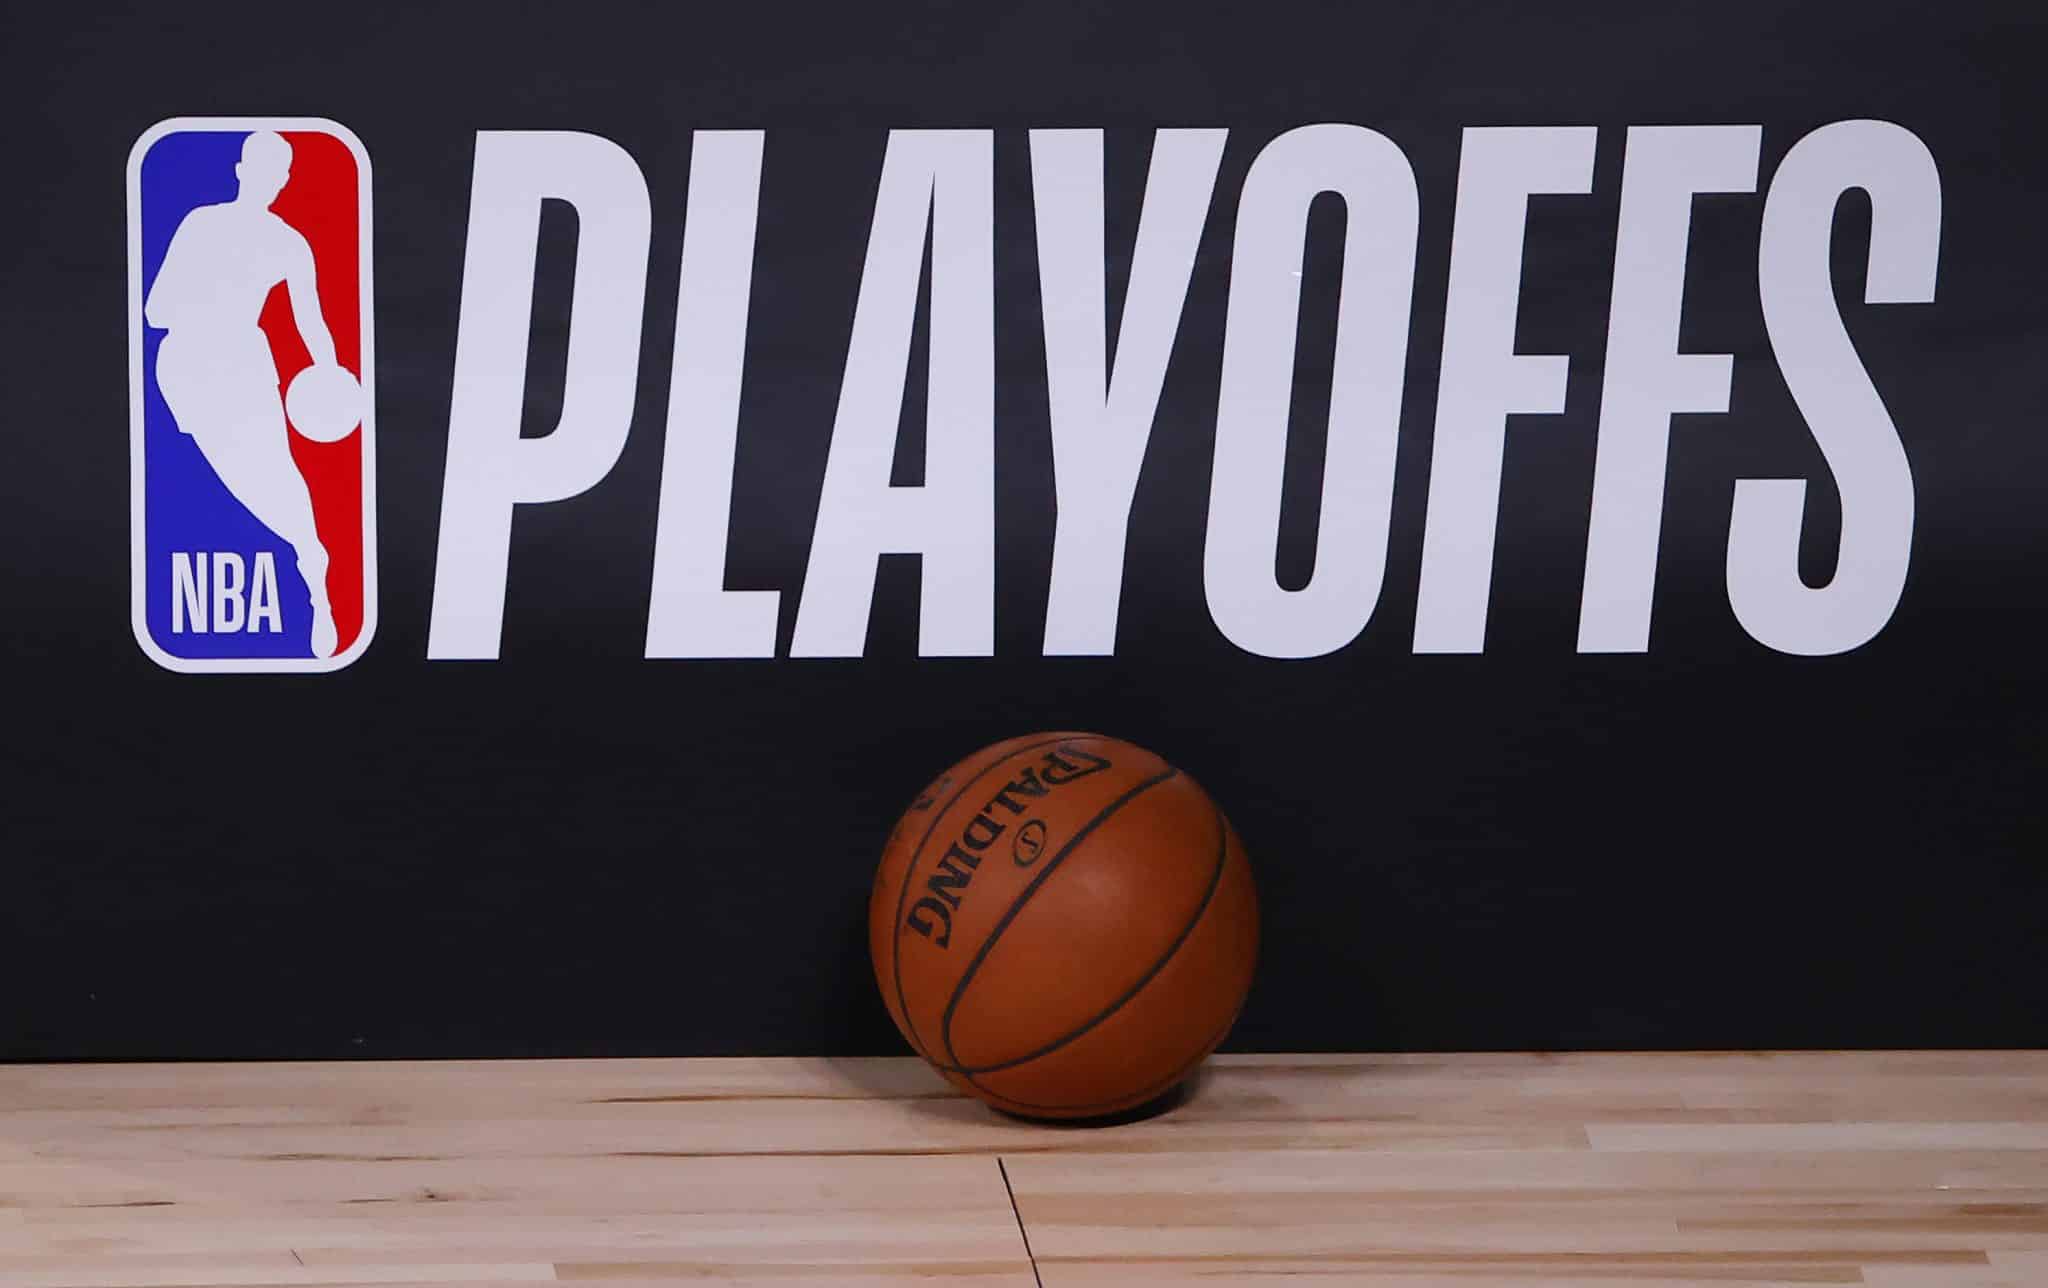 LAKE BUENA VISTA, FLORIDA - AUGUST 26: A basketball sits next to an NBA Playoffs logo in Game Five of the Eastern Conference First Round scheduled between the Milwaukee Bucks and the Orlando Magic during the 2020 NBA Playoffs at AdventHealth Arena at ESPN Wide World Of Sports Complex on August 26, 2020 in Lake Buena Vista, Florida. NOTE TO USER: User expressly acknowledges and agrees that, by downloading and or using this photograph, User is consenting to the terms and conditions of the Getty Images License Agreement.